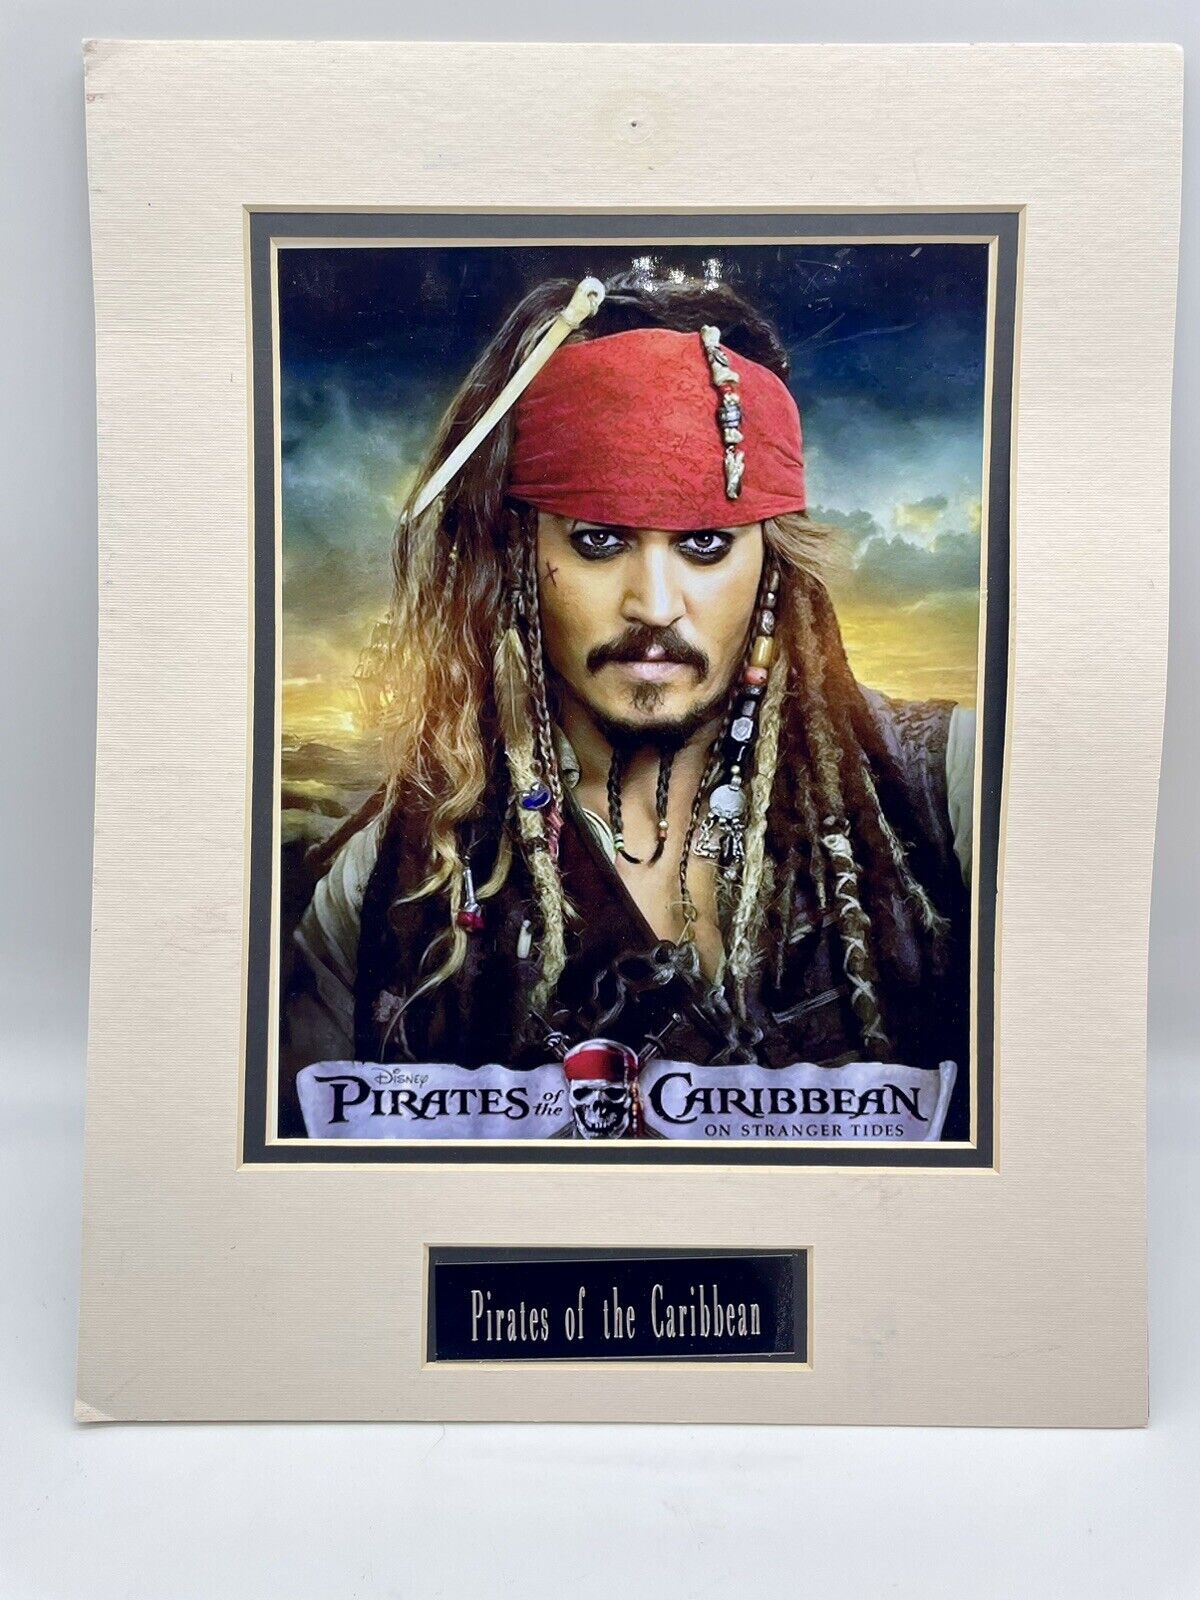 Portrait of Johnny Depp Pirates of The Caribbean 8”x10” Matted In 12”x15” Border